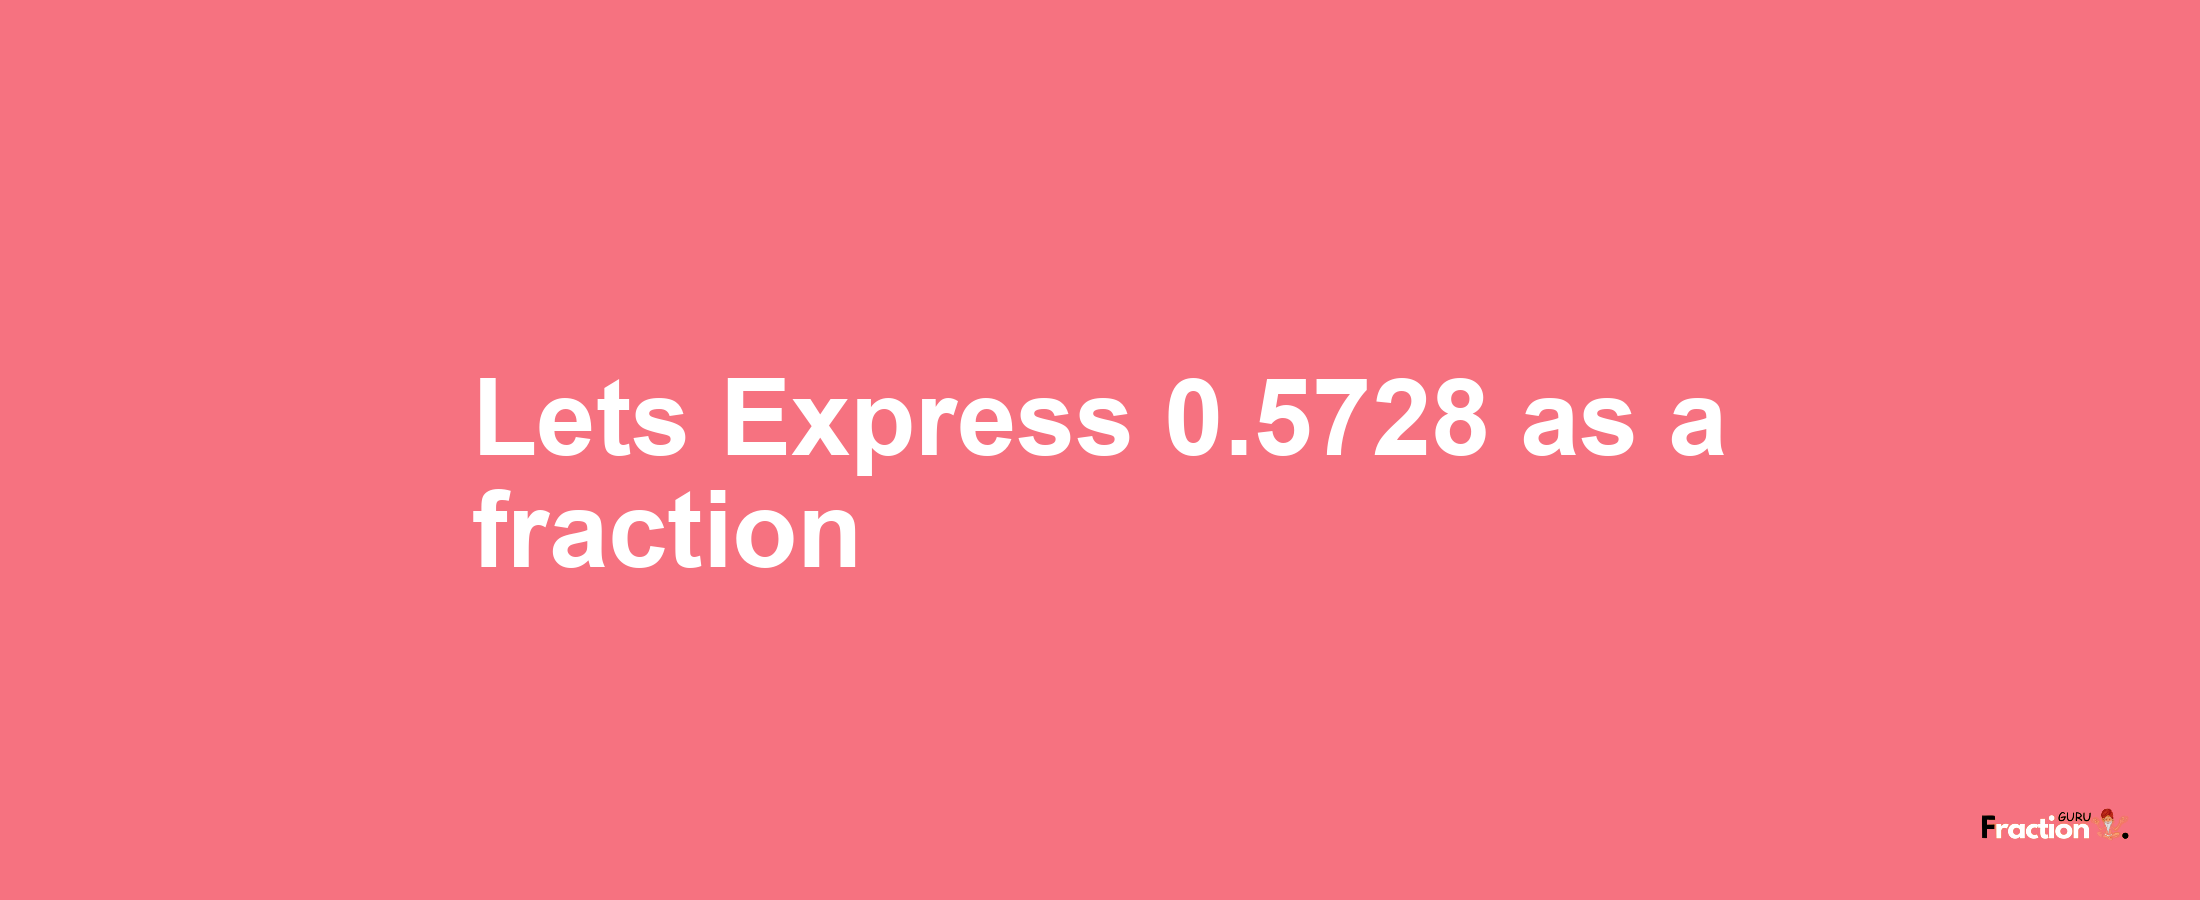 Lets Express 0.5728 as afraction